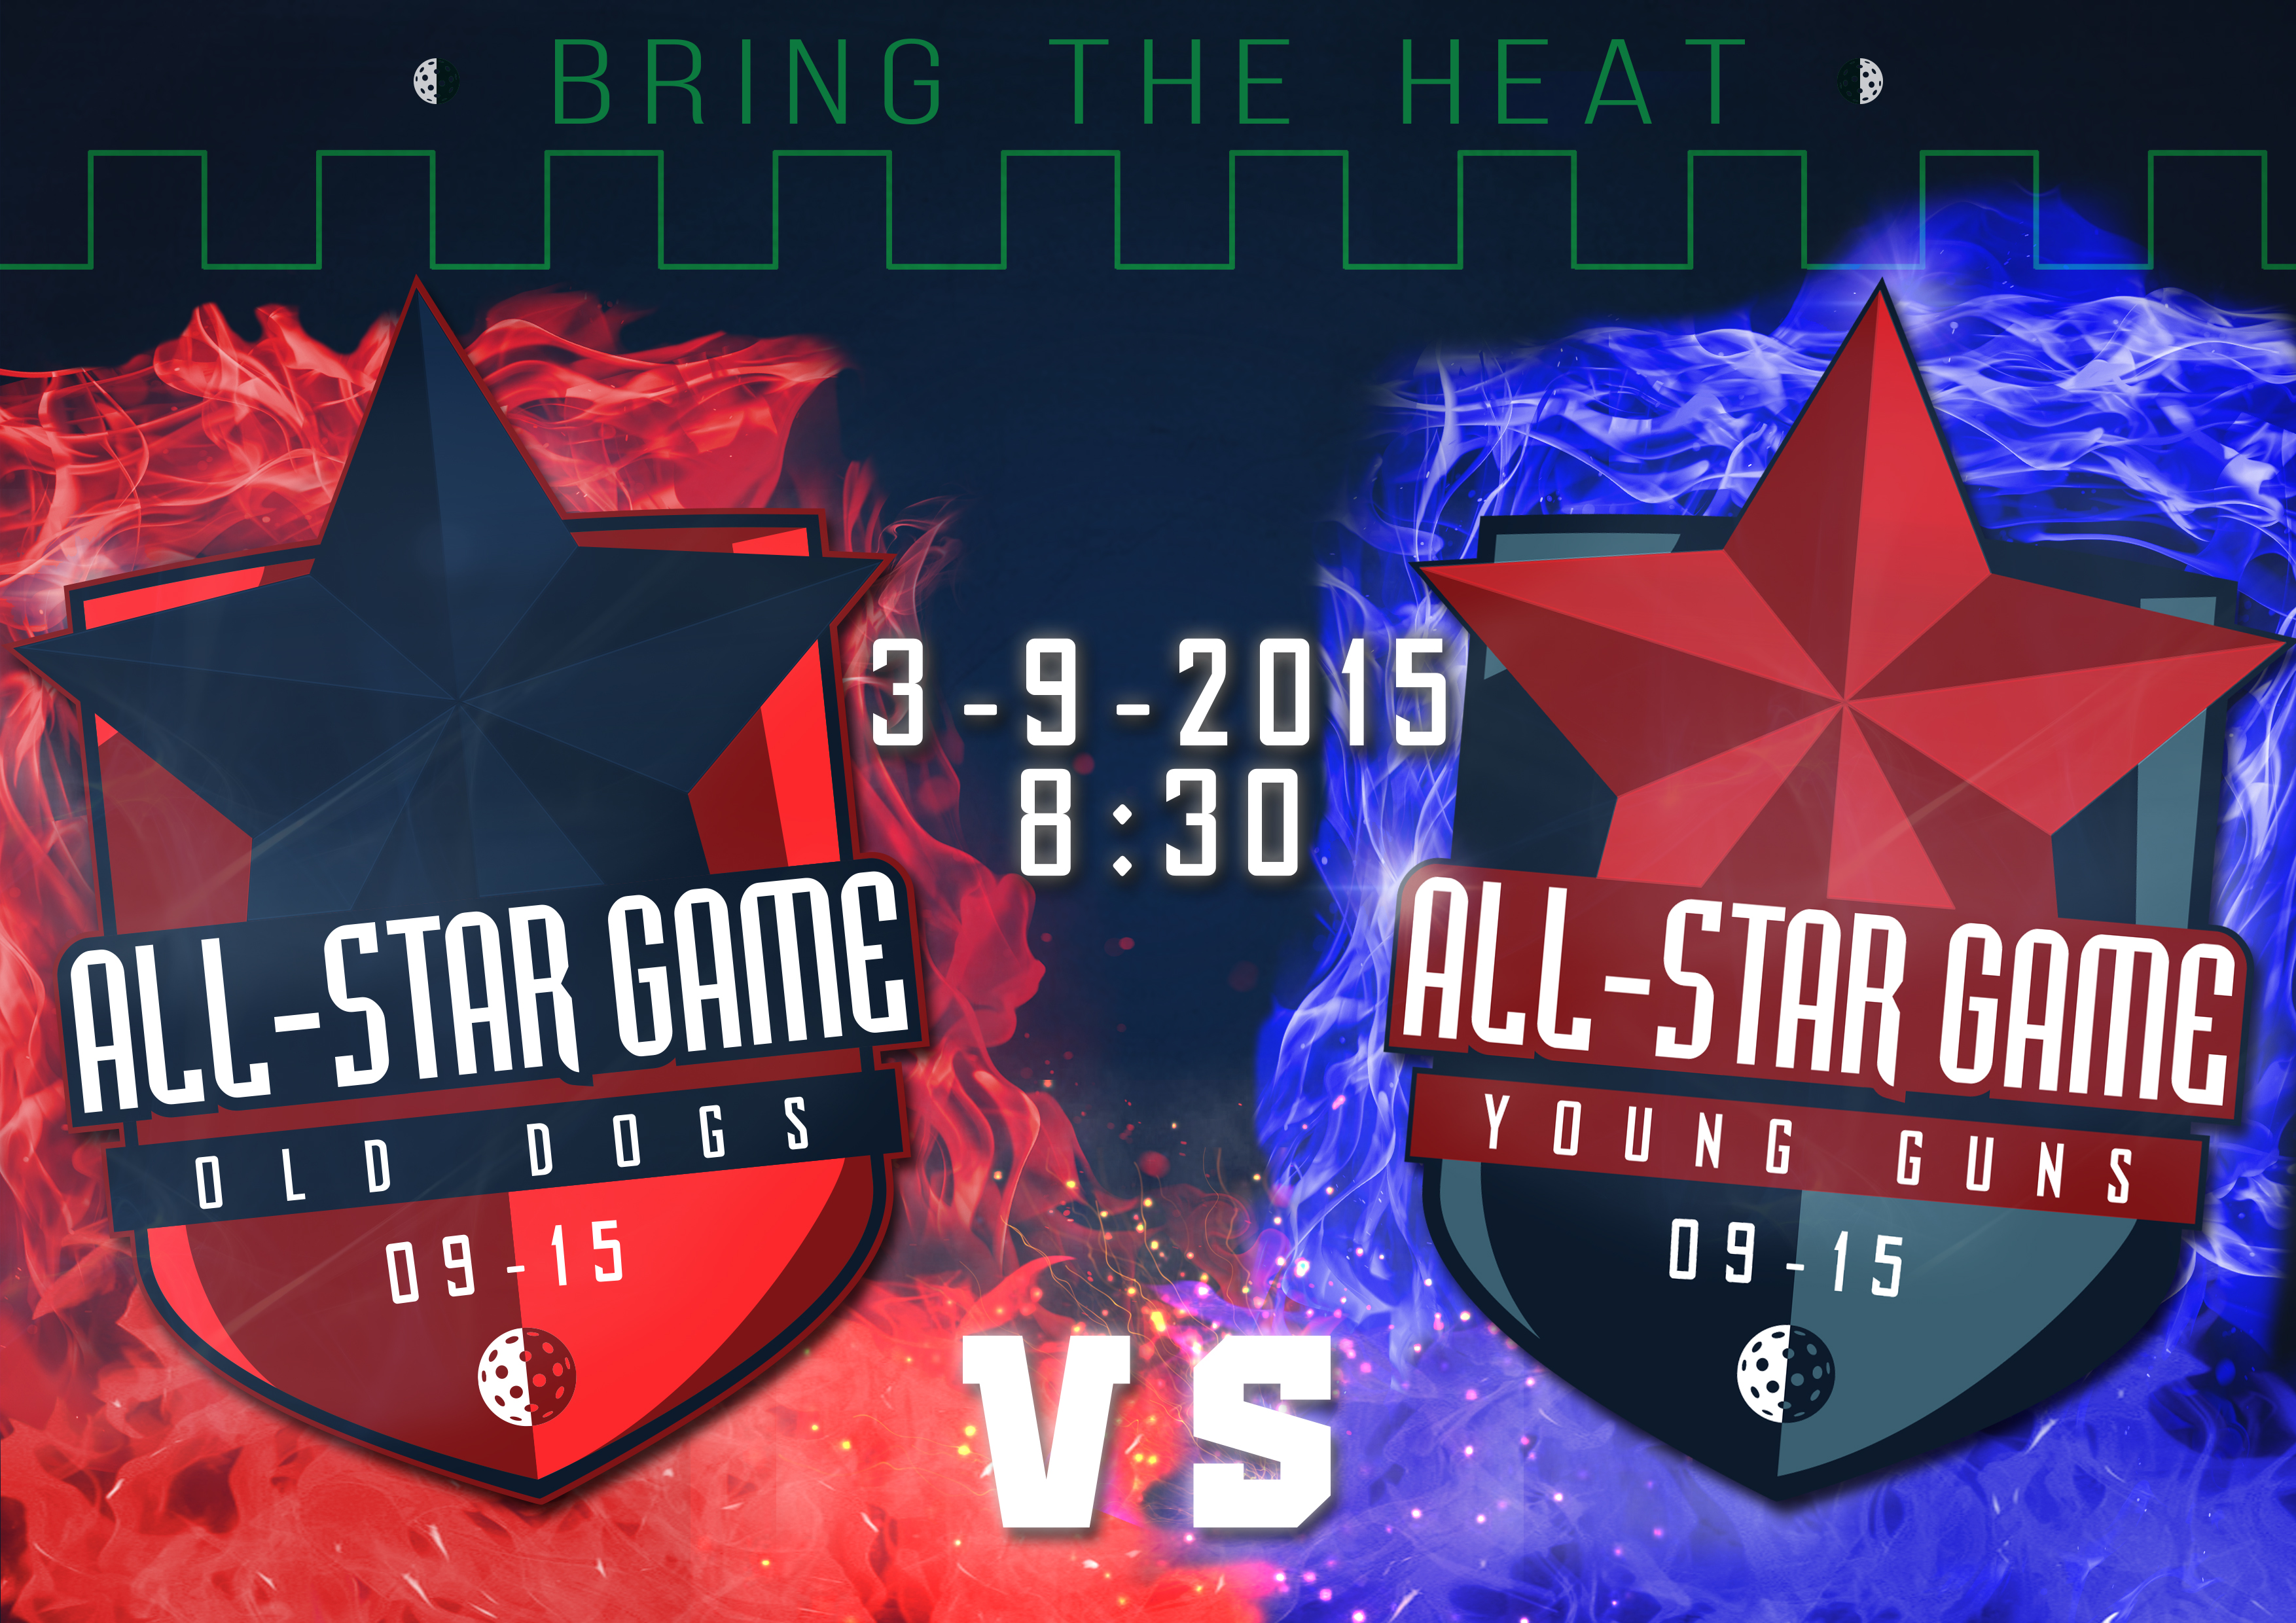 All-star game 2015